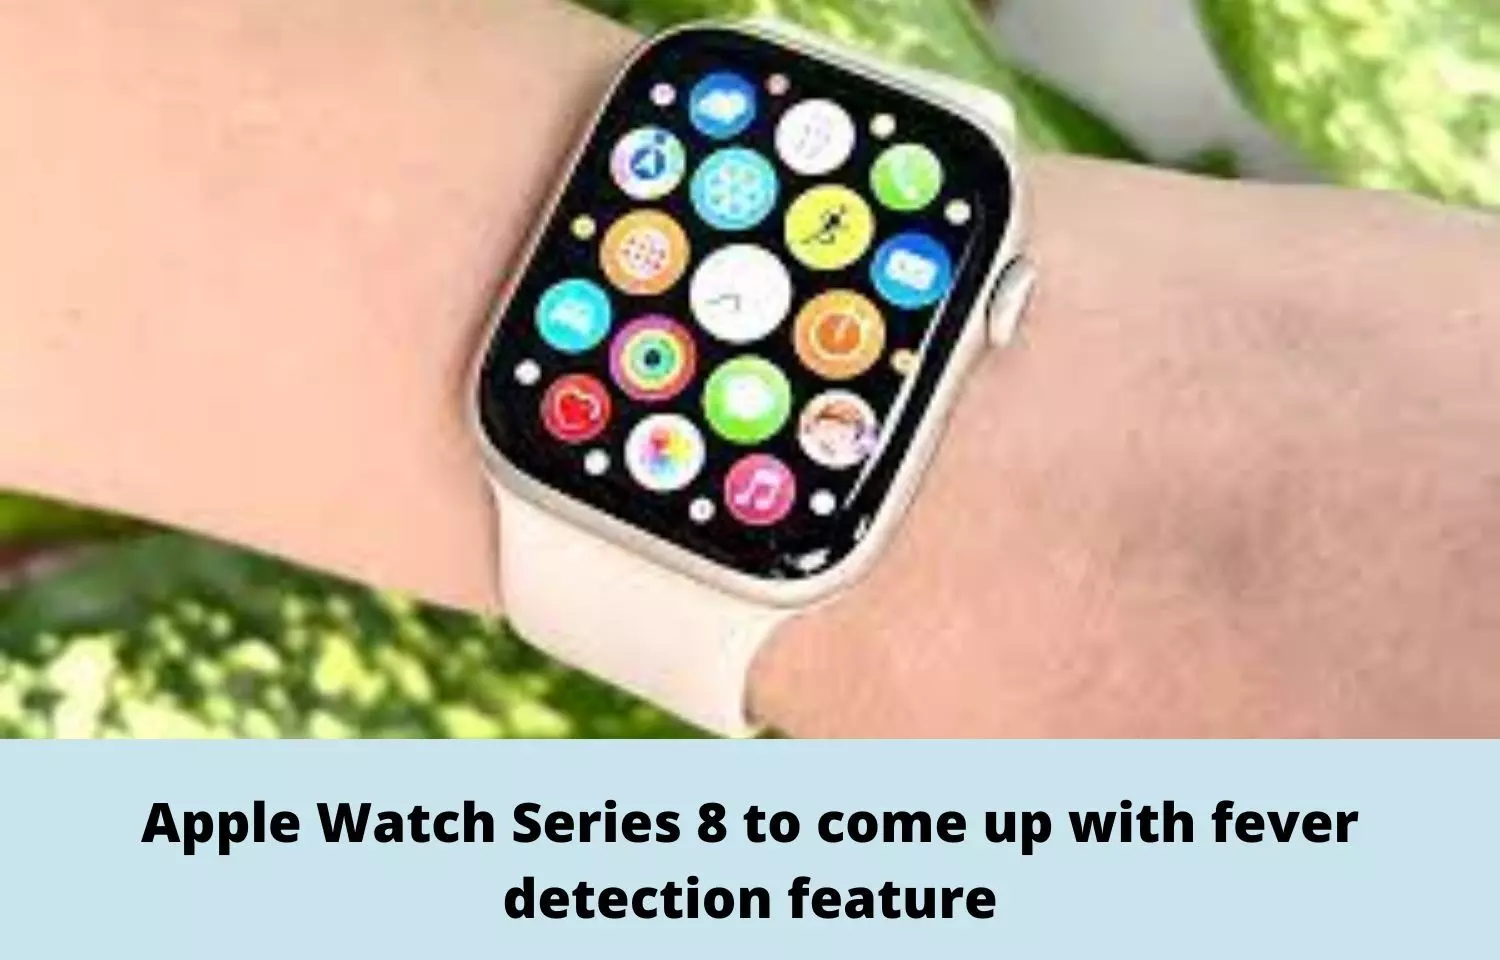 Apple Watch Series 8 to come up with fever detection feature